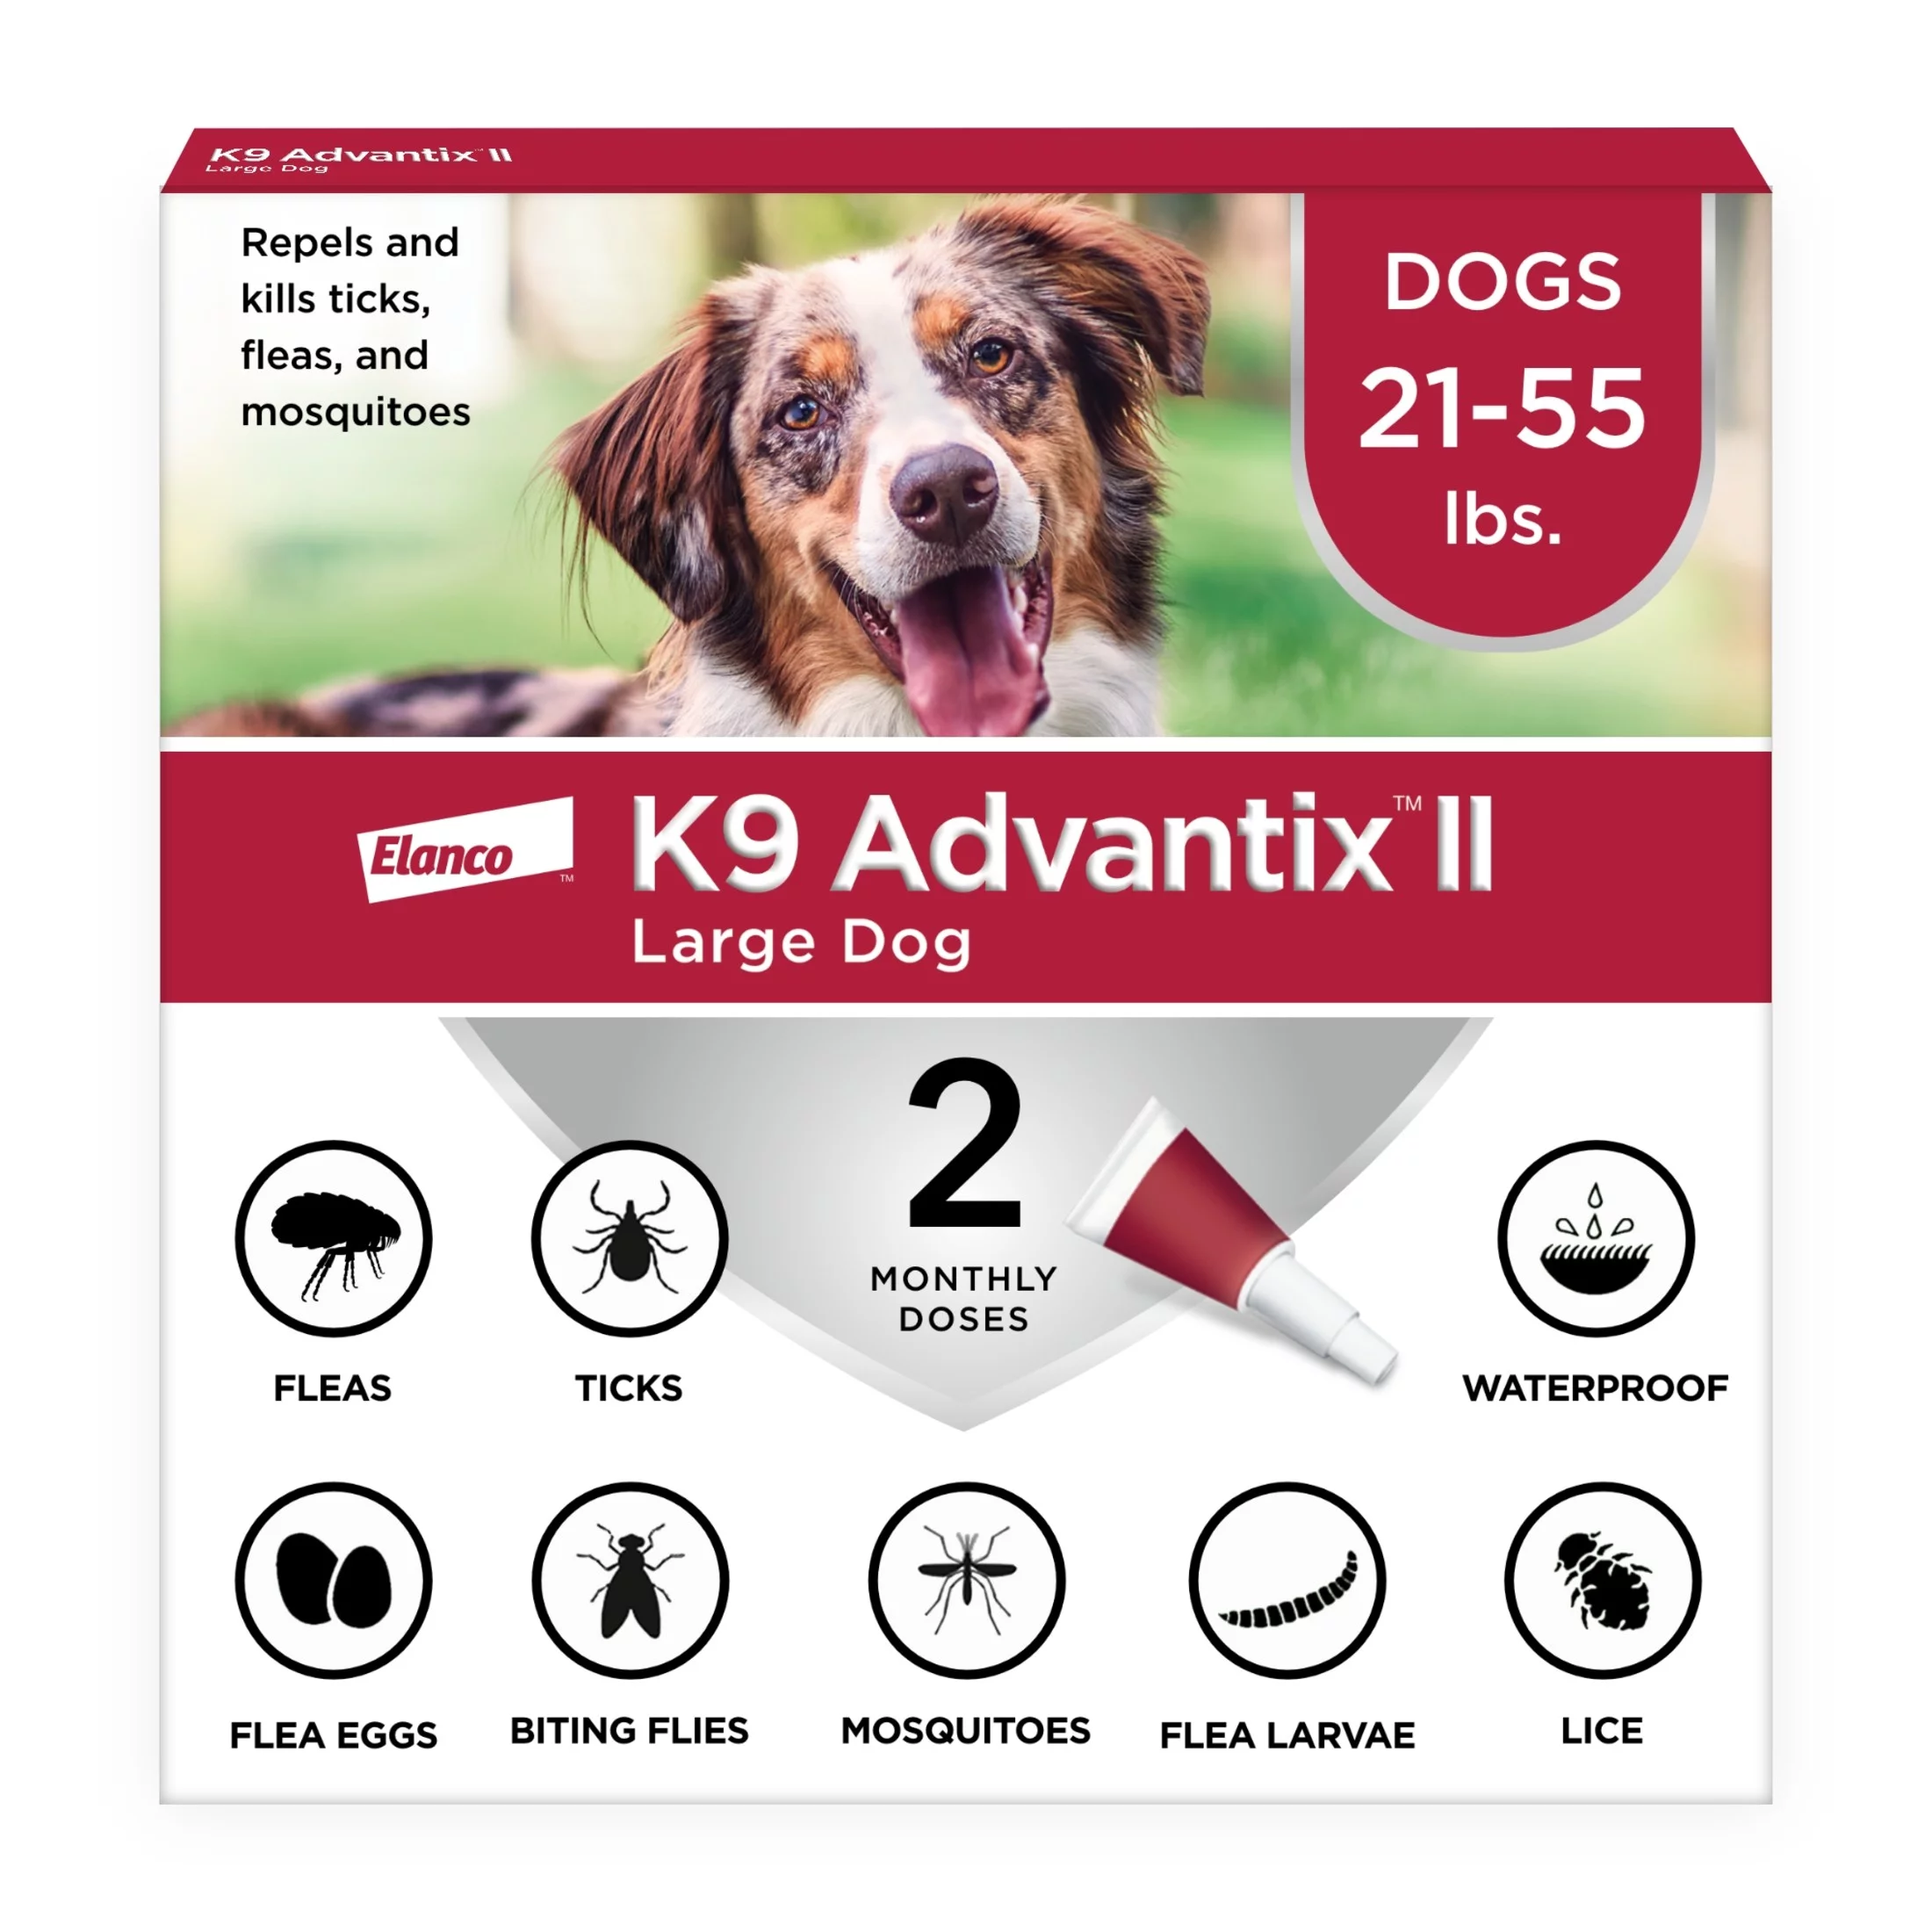 K9 Advantix II Vet-Recommended Flea, Tick & Mosquito Prevention for Large Dogs 21-55 lbs, 2 Monthly Treatments